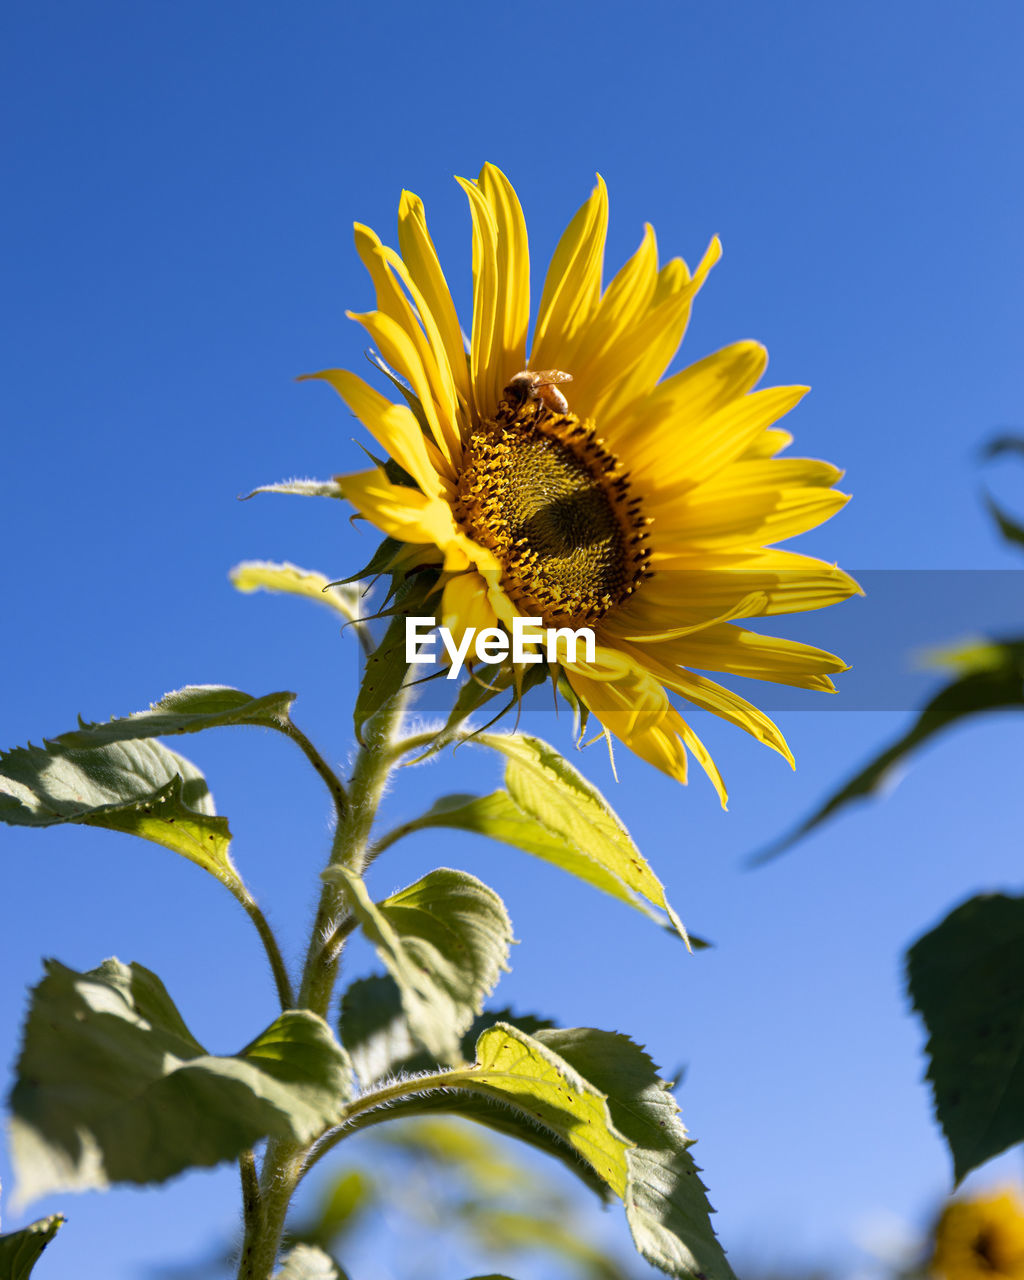 LOW ANGLE VIEW OF SUNFLOWER